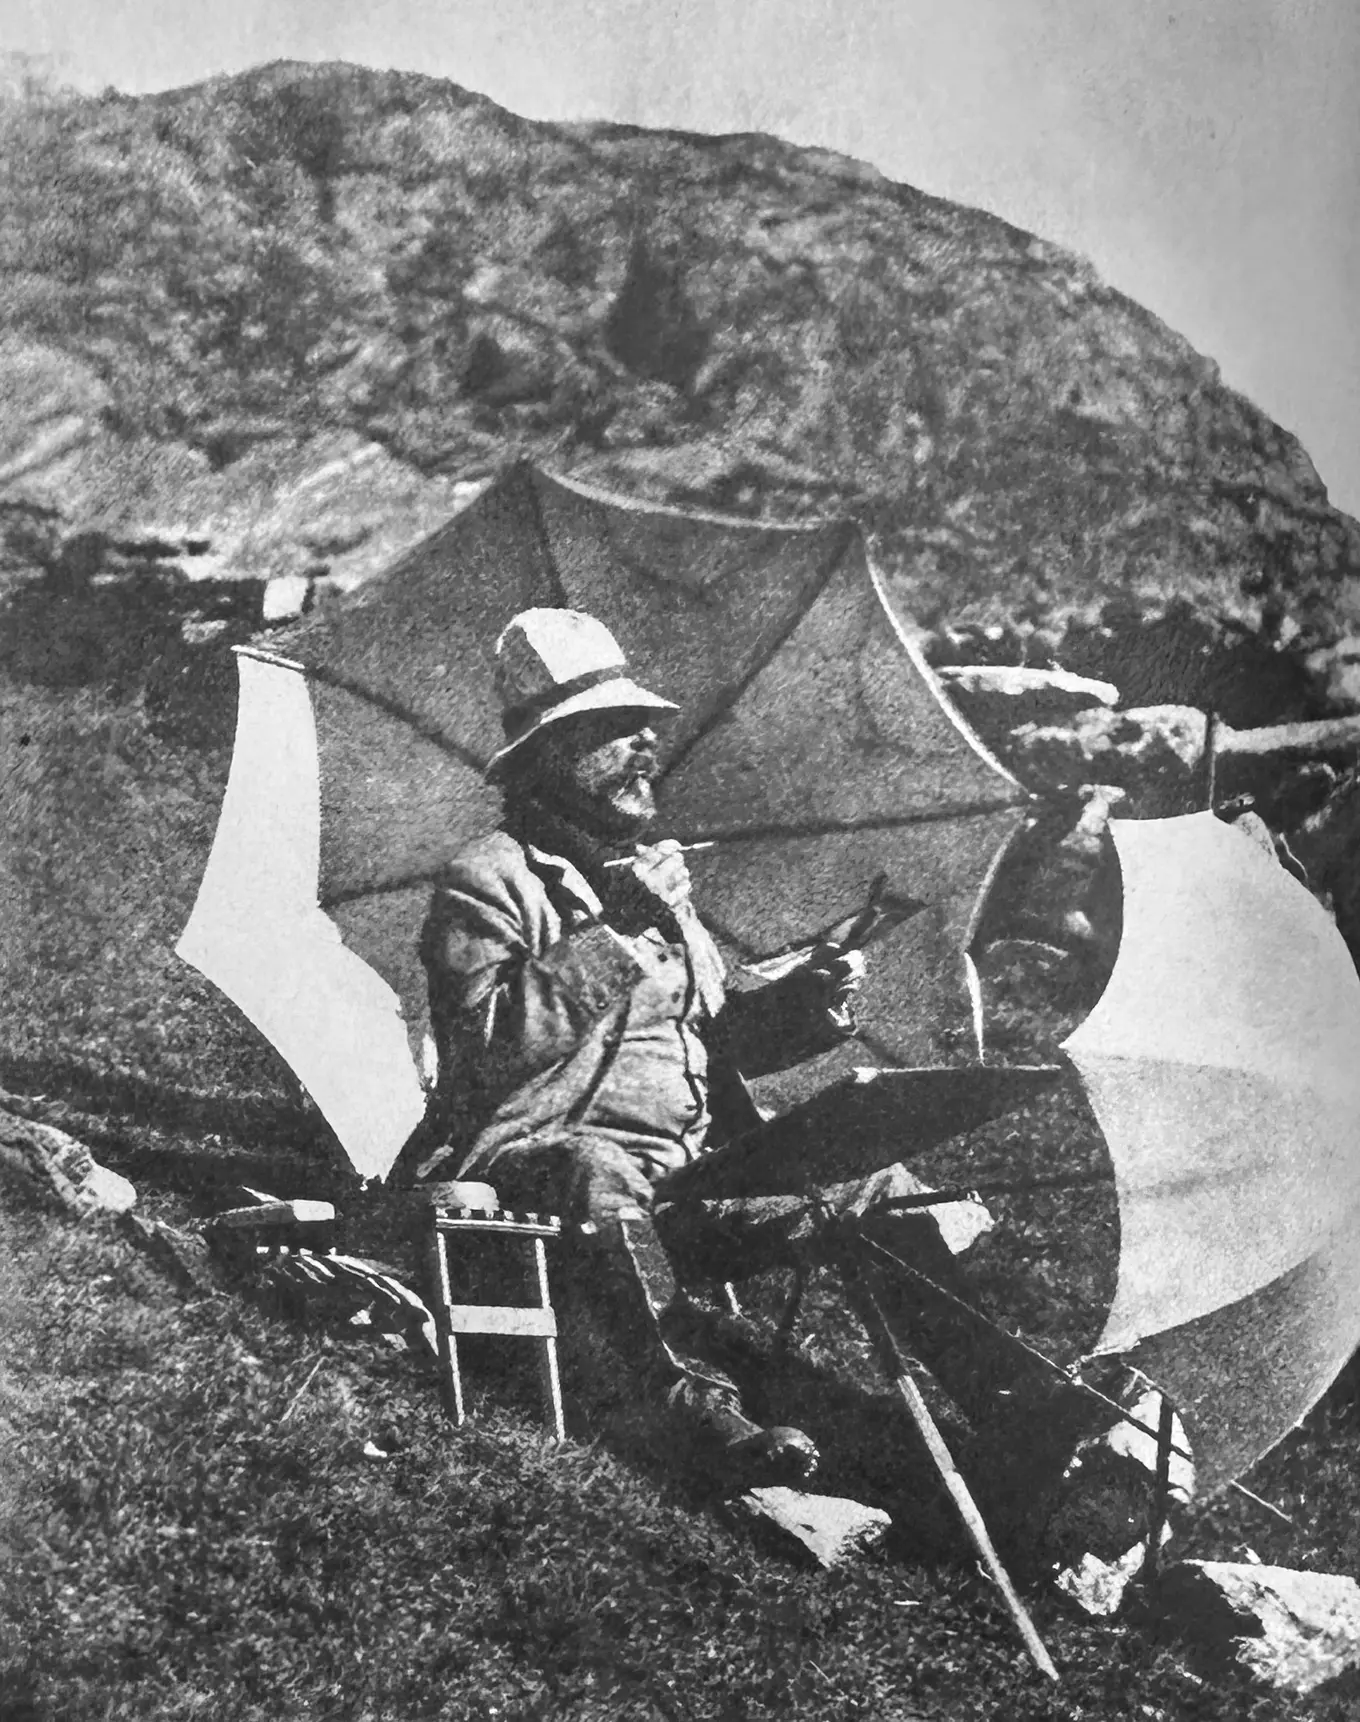 A black and white photograph of a man painting on a hillside.